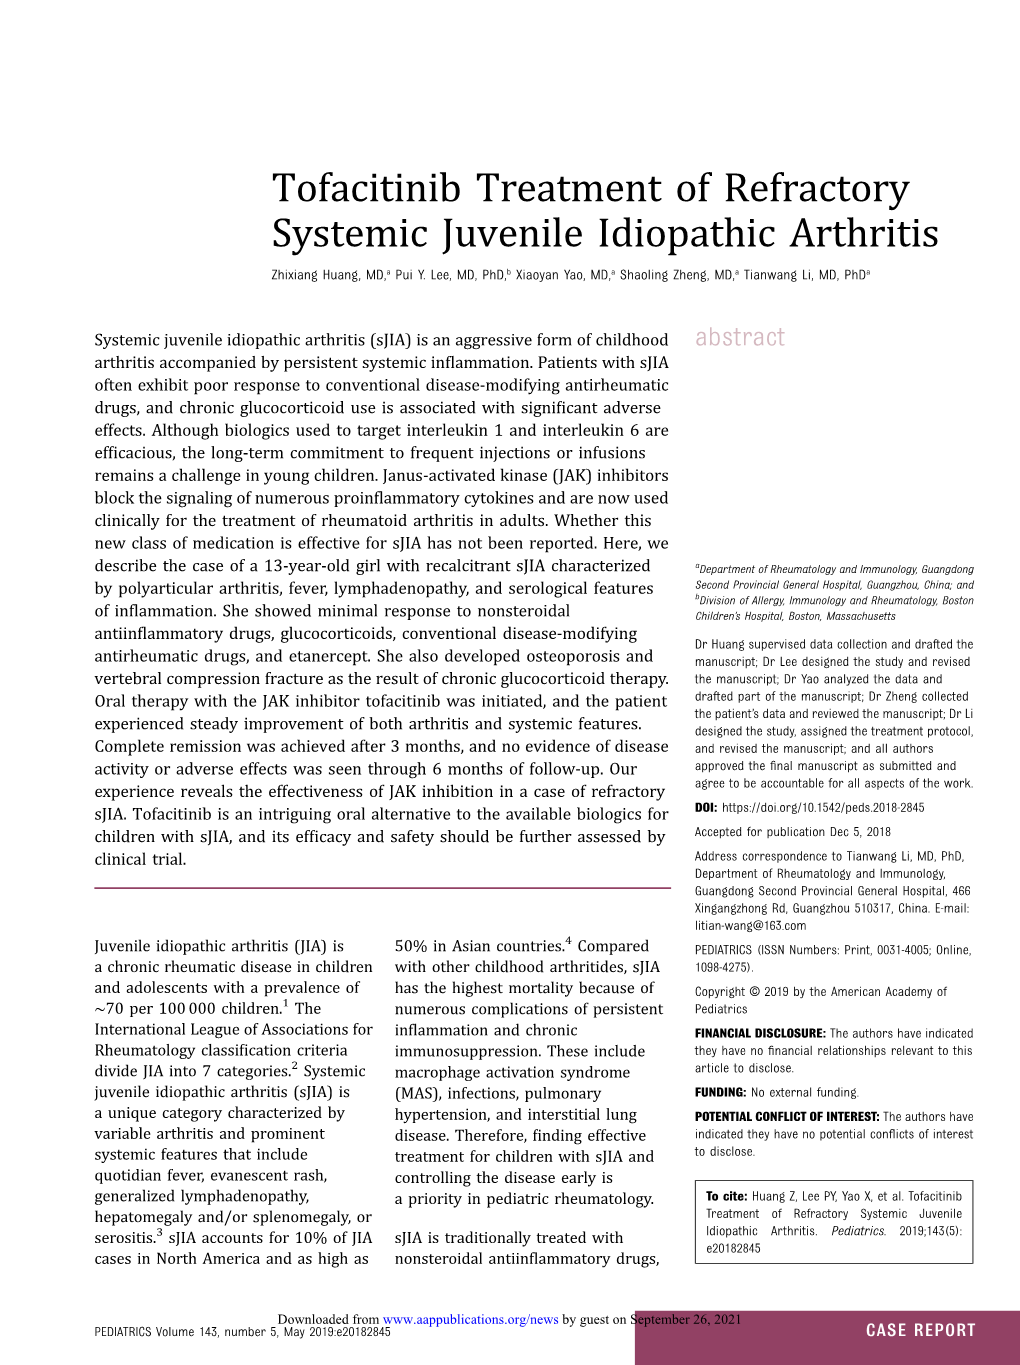 Tofacitinib Treatment of Refractory Systemic Juvenile Idiopathic Arthritis Zhixiang Huang, MD,A Pui Y